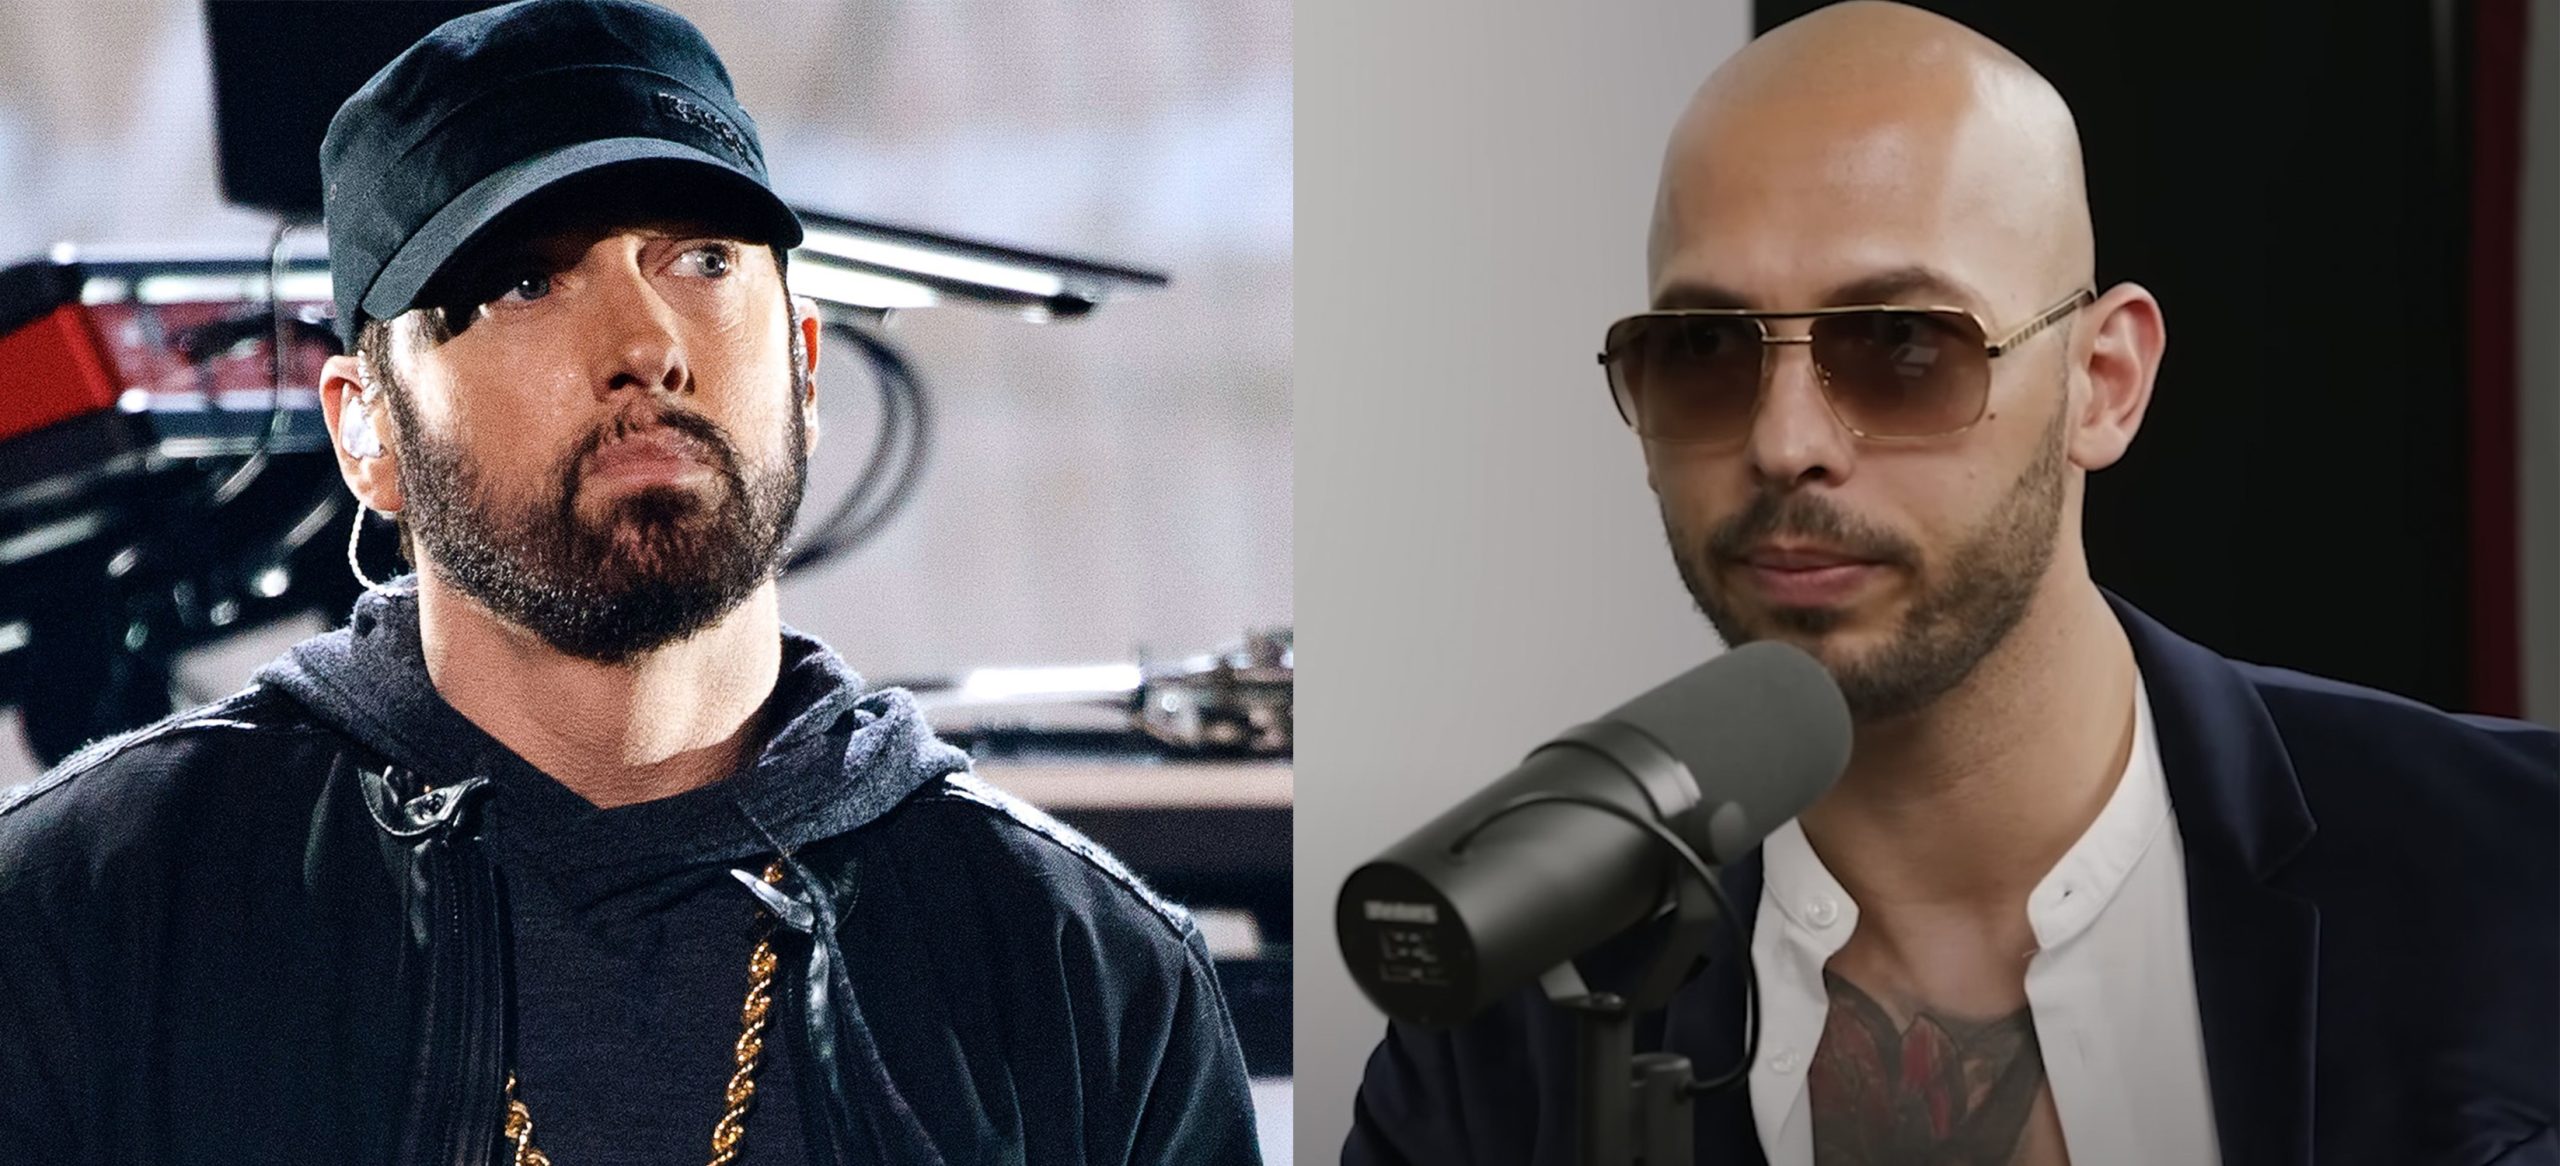 Andrew Tate calls Eminem crybaby, asks him to retire